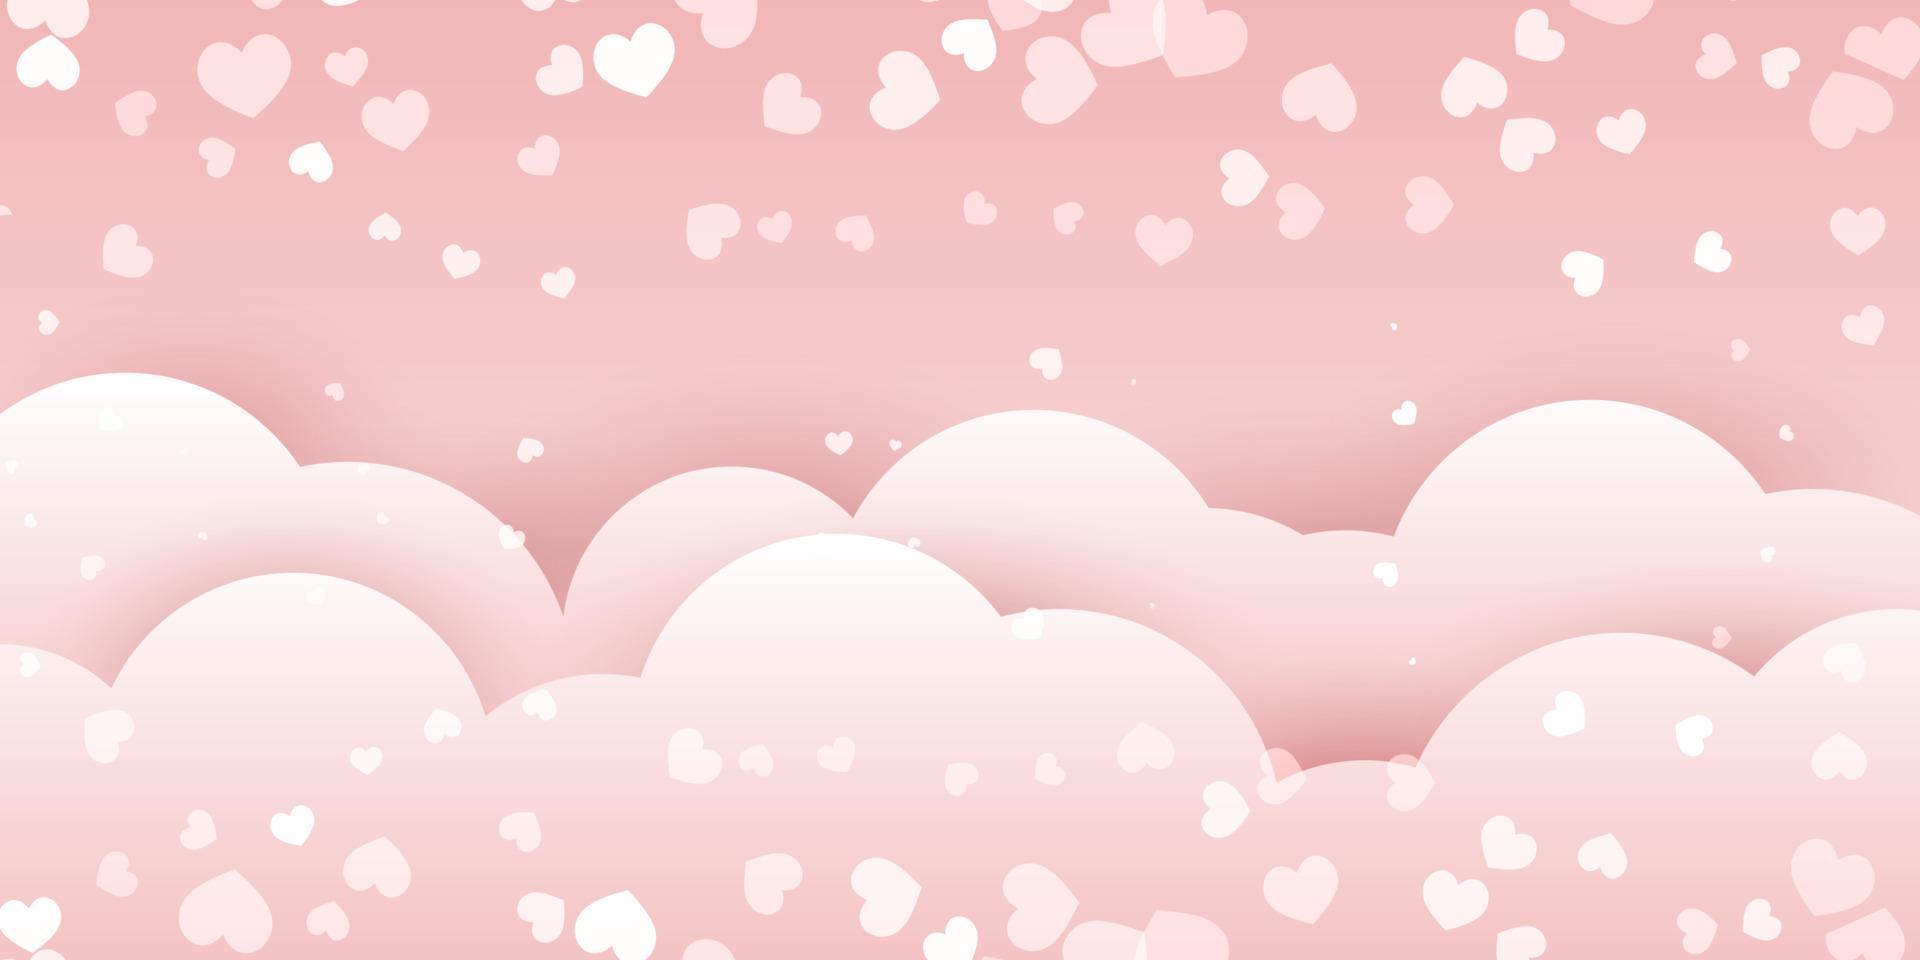 Valentines day banner with clouds and hearts vector